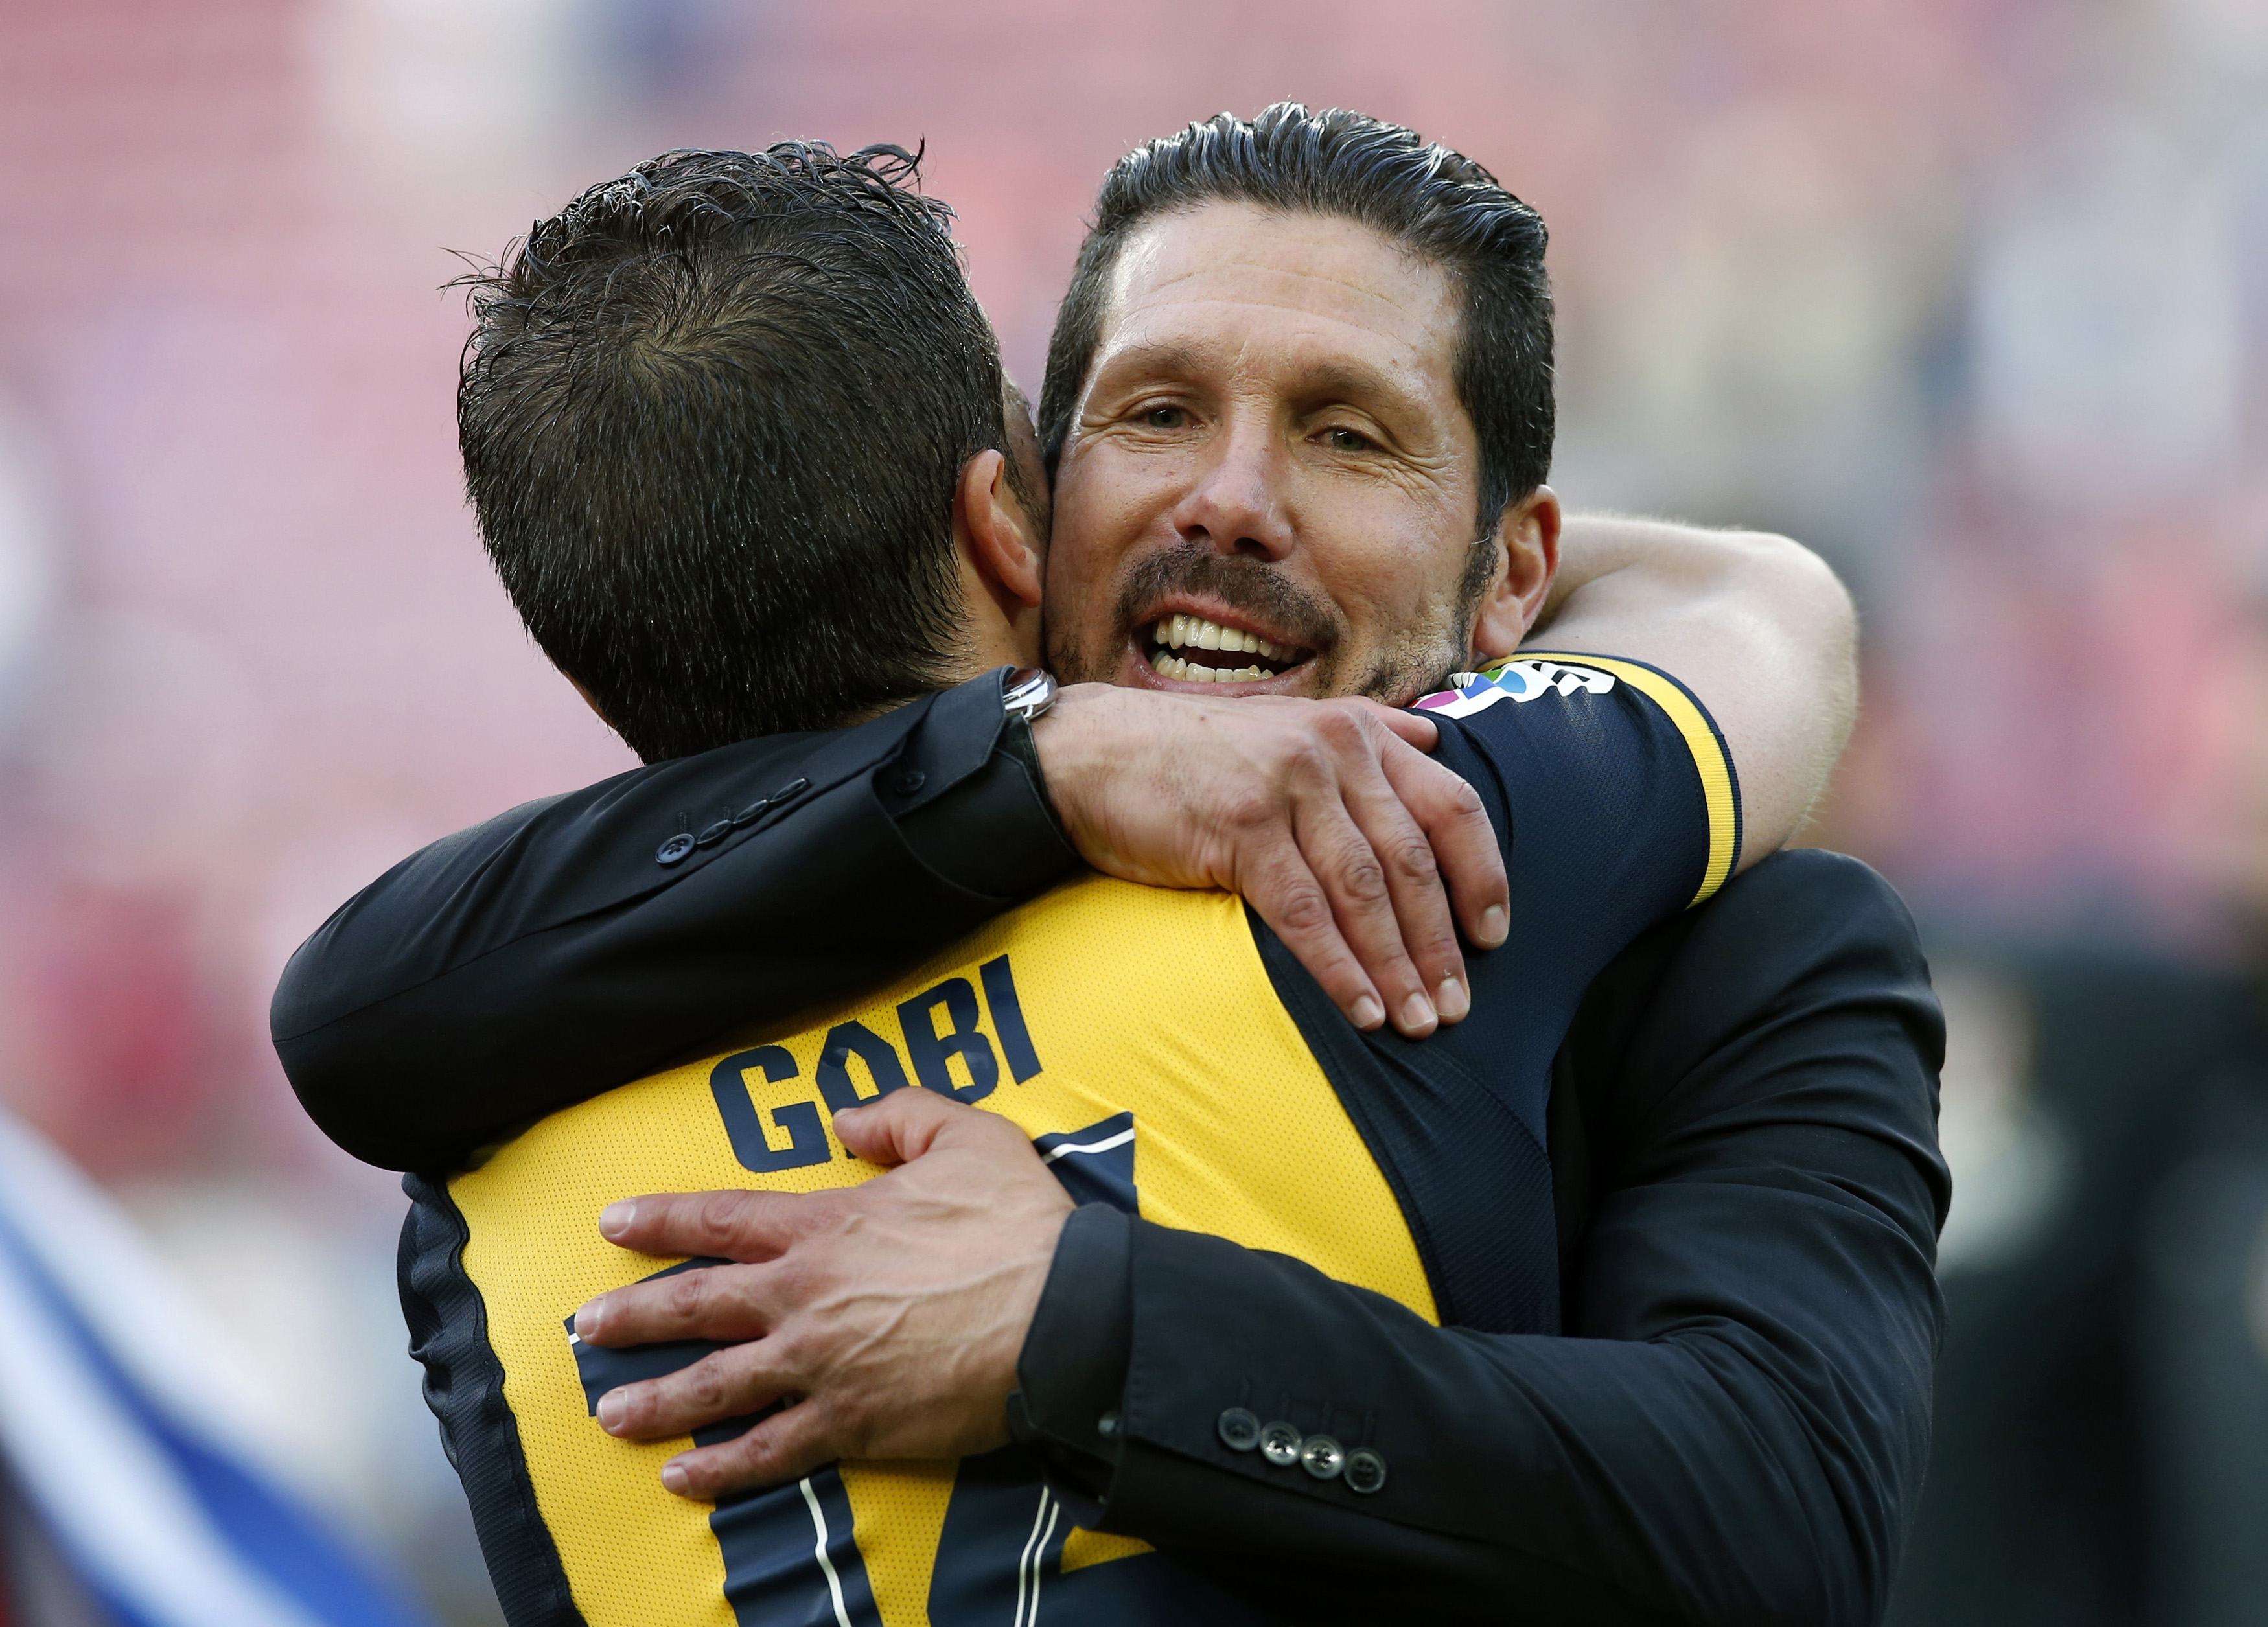 Atletico Madrid's coach Diego Simeone (R) embraces captain Gabi after winning the Spanish first division title following their soccer match against Barcelona at Camp Nou stadium in Barcelona May 17, 2014. REUTERS/Albert Gea (SPAIN - Tags: SPORT SOCCER)